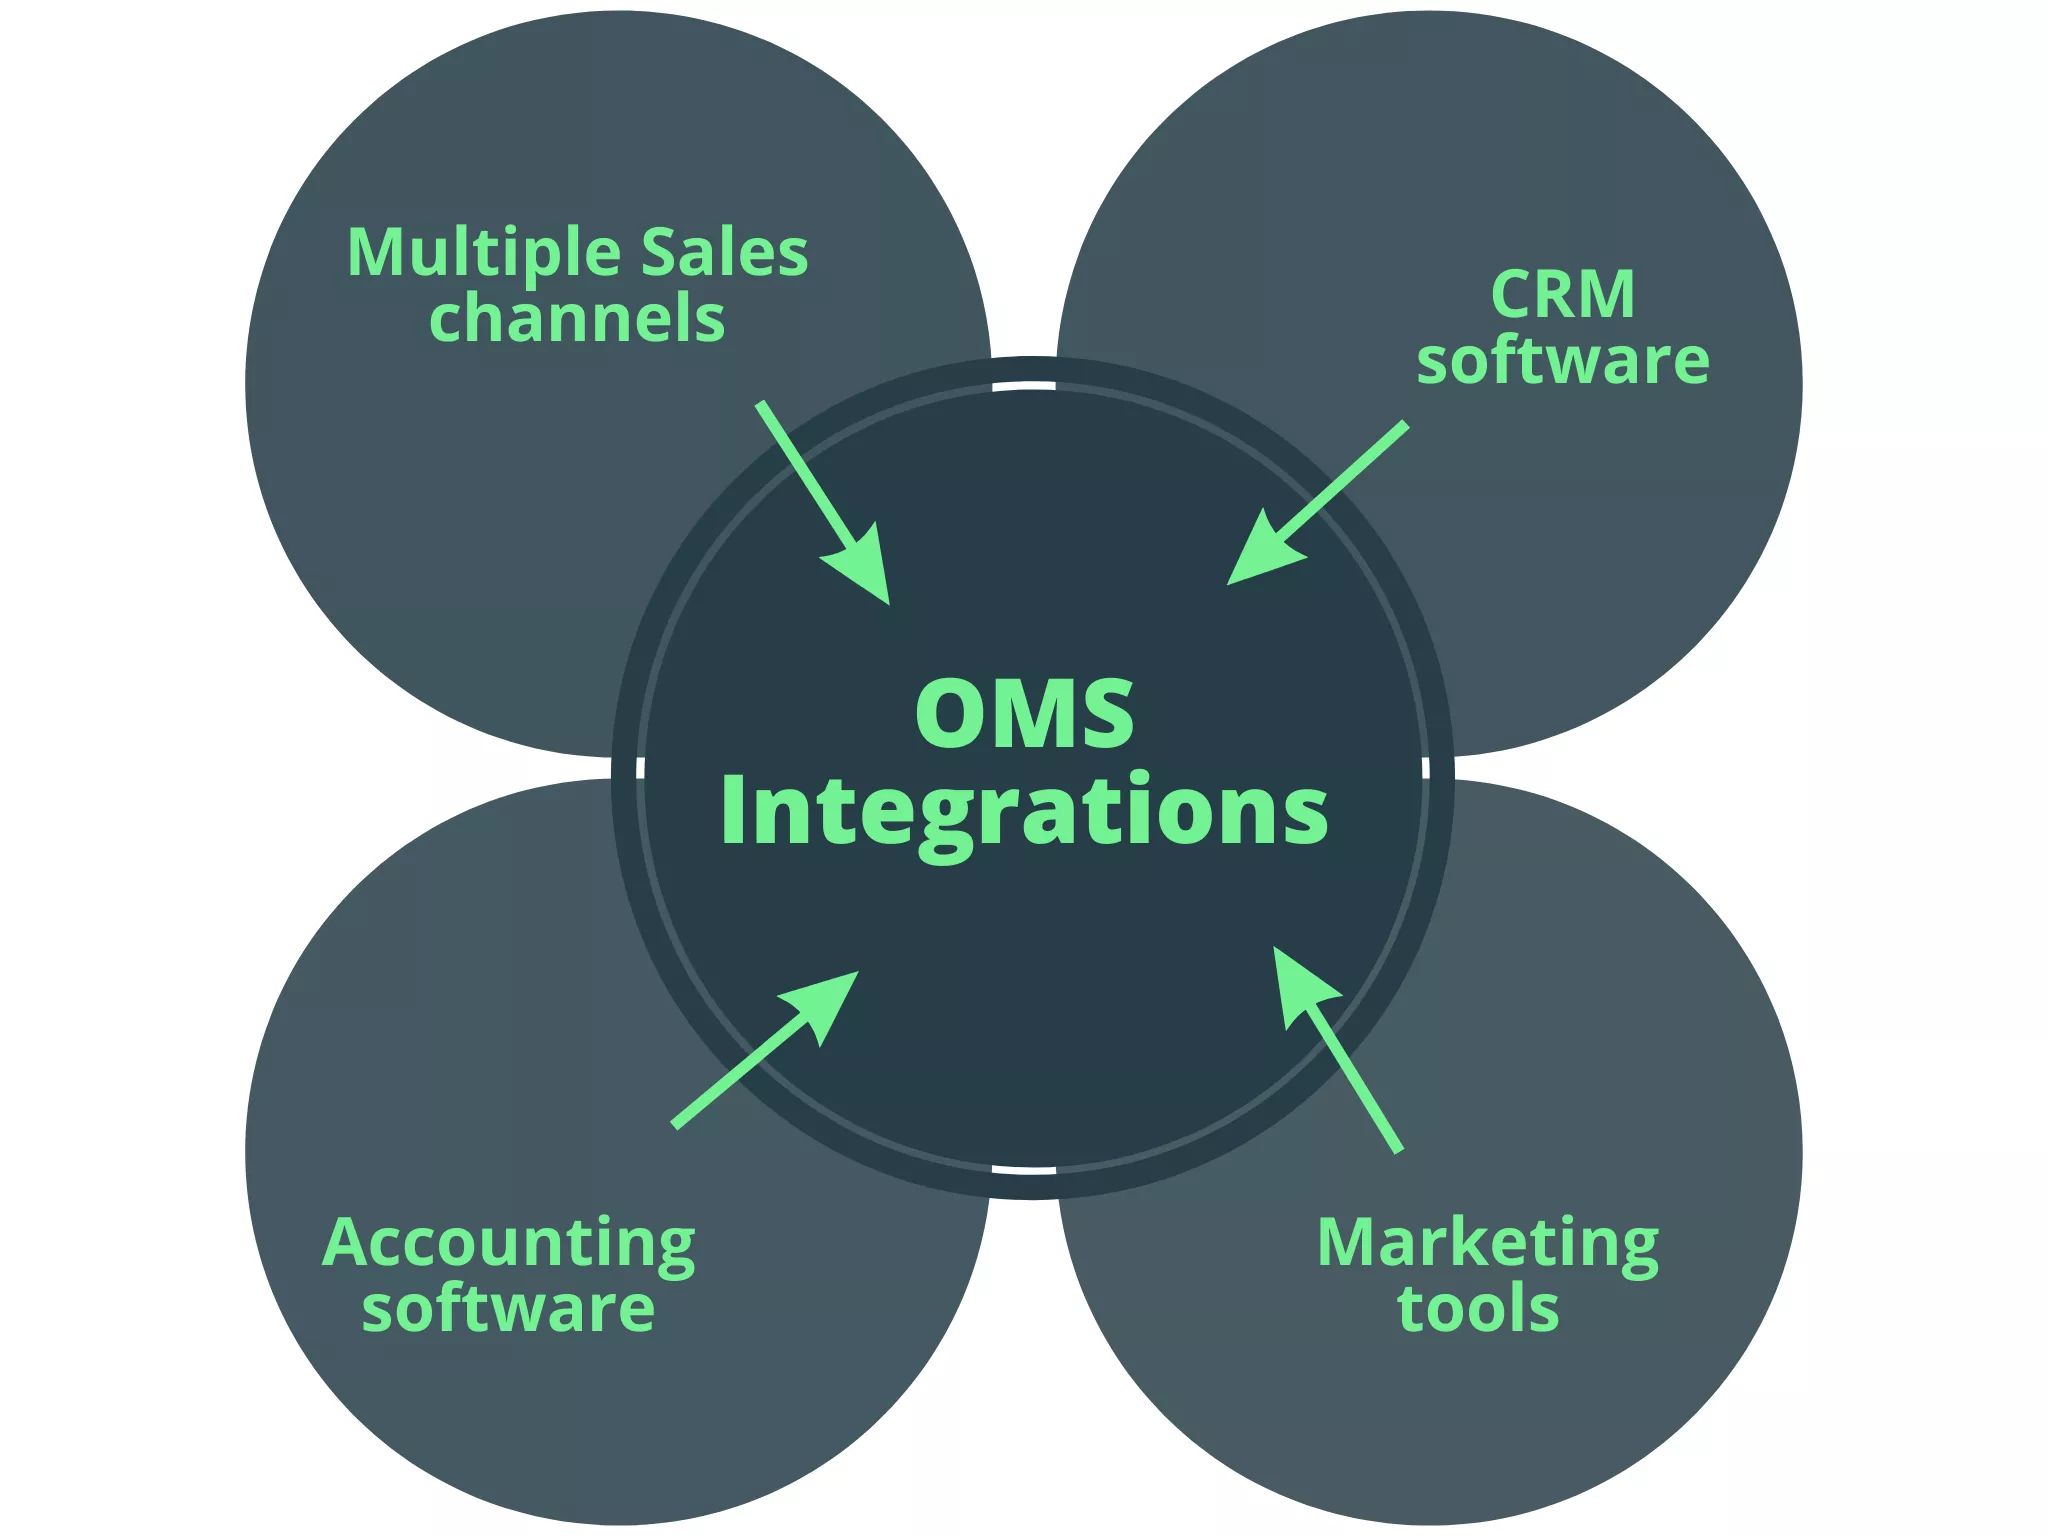 The integrations of an order management system